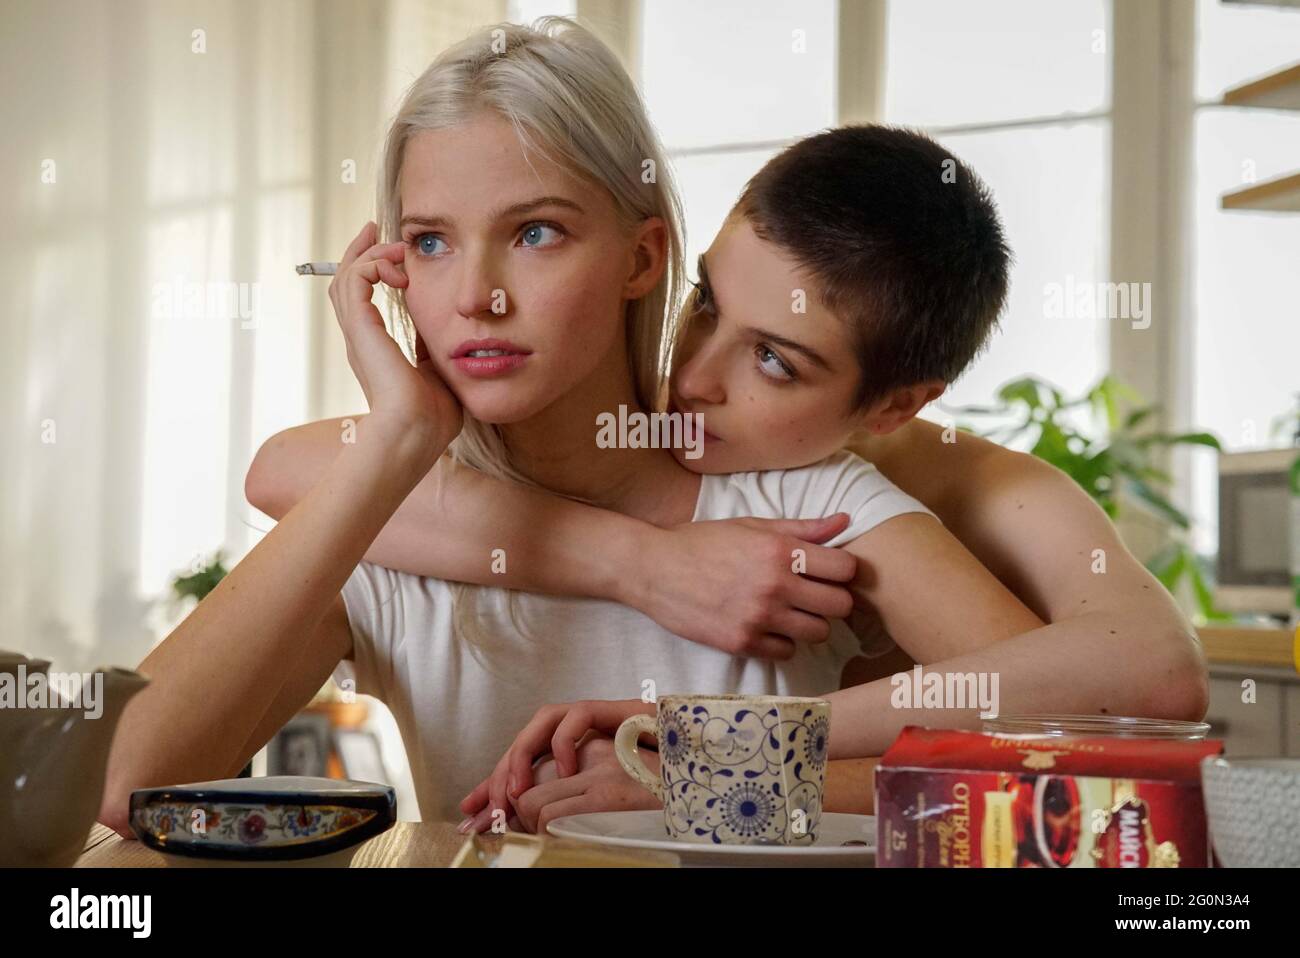 USA. Sasha Luss in the ©Summit Entertainment new film: Anna (2019).  PLOT: Beneath Anna Poliatova's striking beauty lies a secret that will unleash her indelible strength and skill to become one of the world's most feared government assassins. Ref: LMK106-J5161-080719 Supplied by LMKMEDIA. Editorial Only. Landmark Media is not the copyright owner of these Film or TV stills but provides a service only for recognised Media outlets. pictures@lmkmedia.com Stock Photo